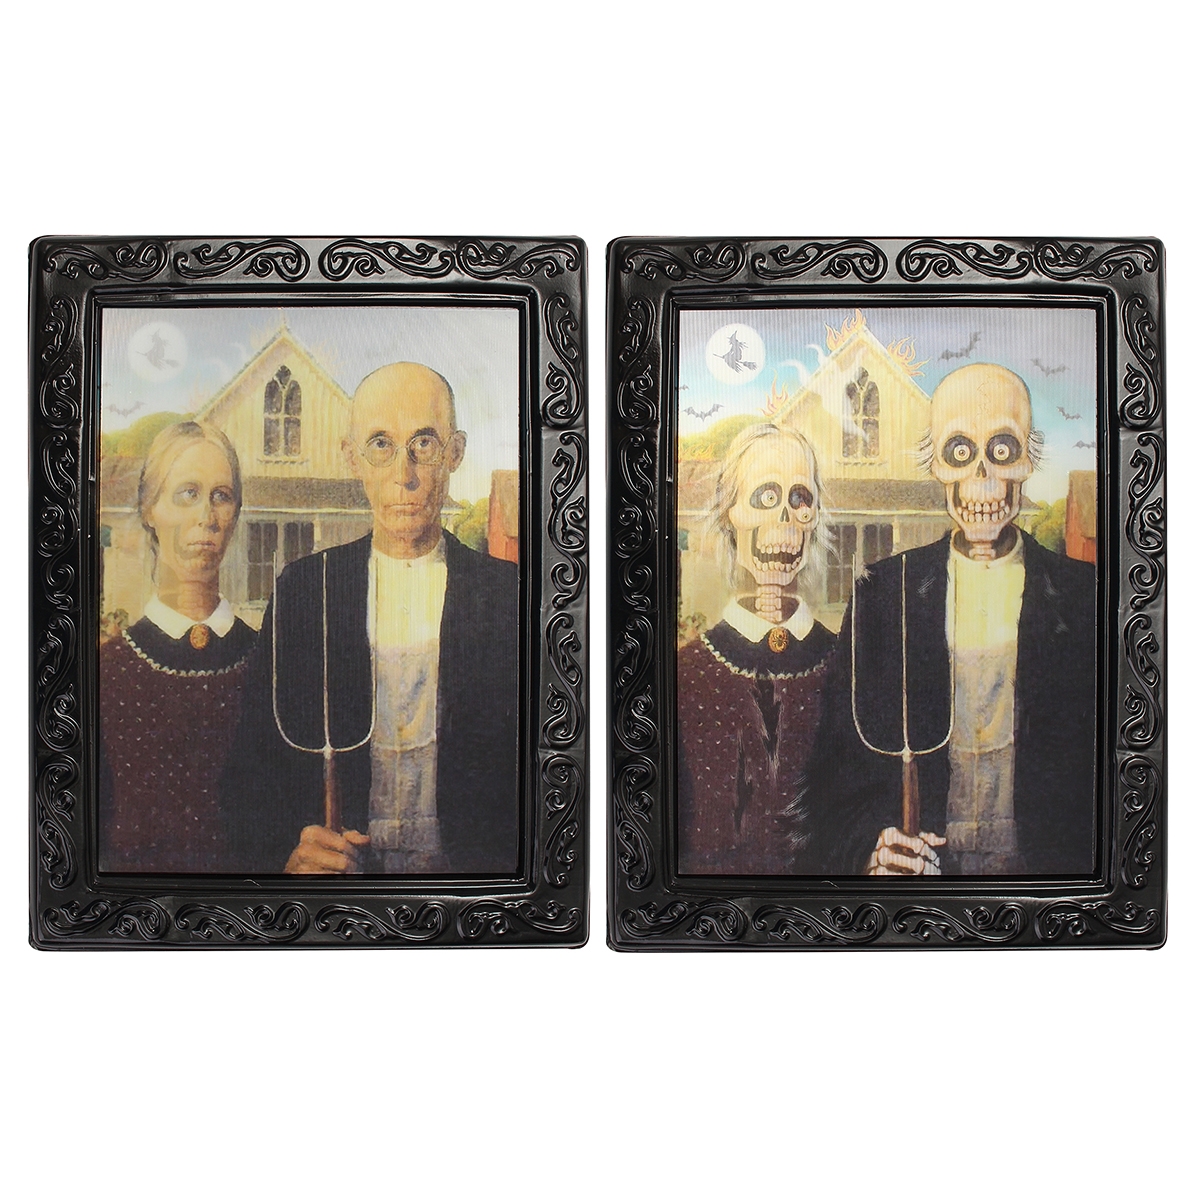 Lenticular 3D Changing Face Horror Portrait Haunted Spooky Halloween Home Decorations